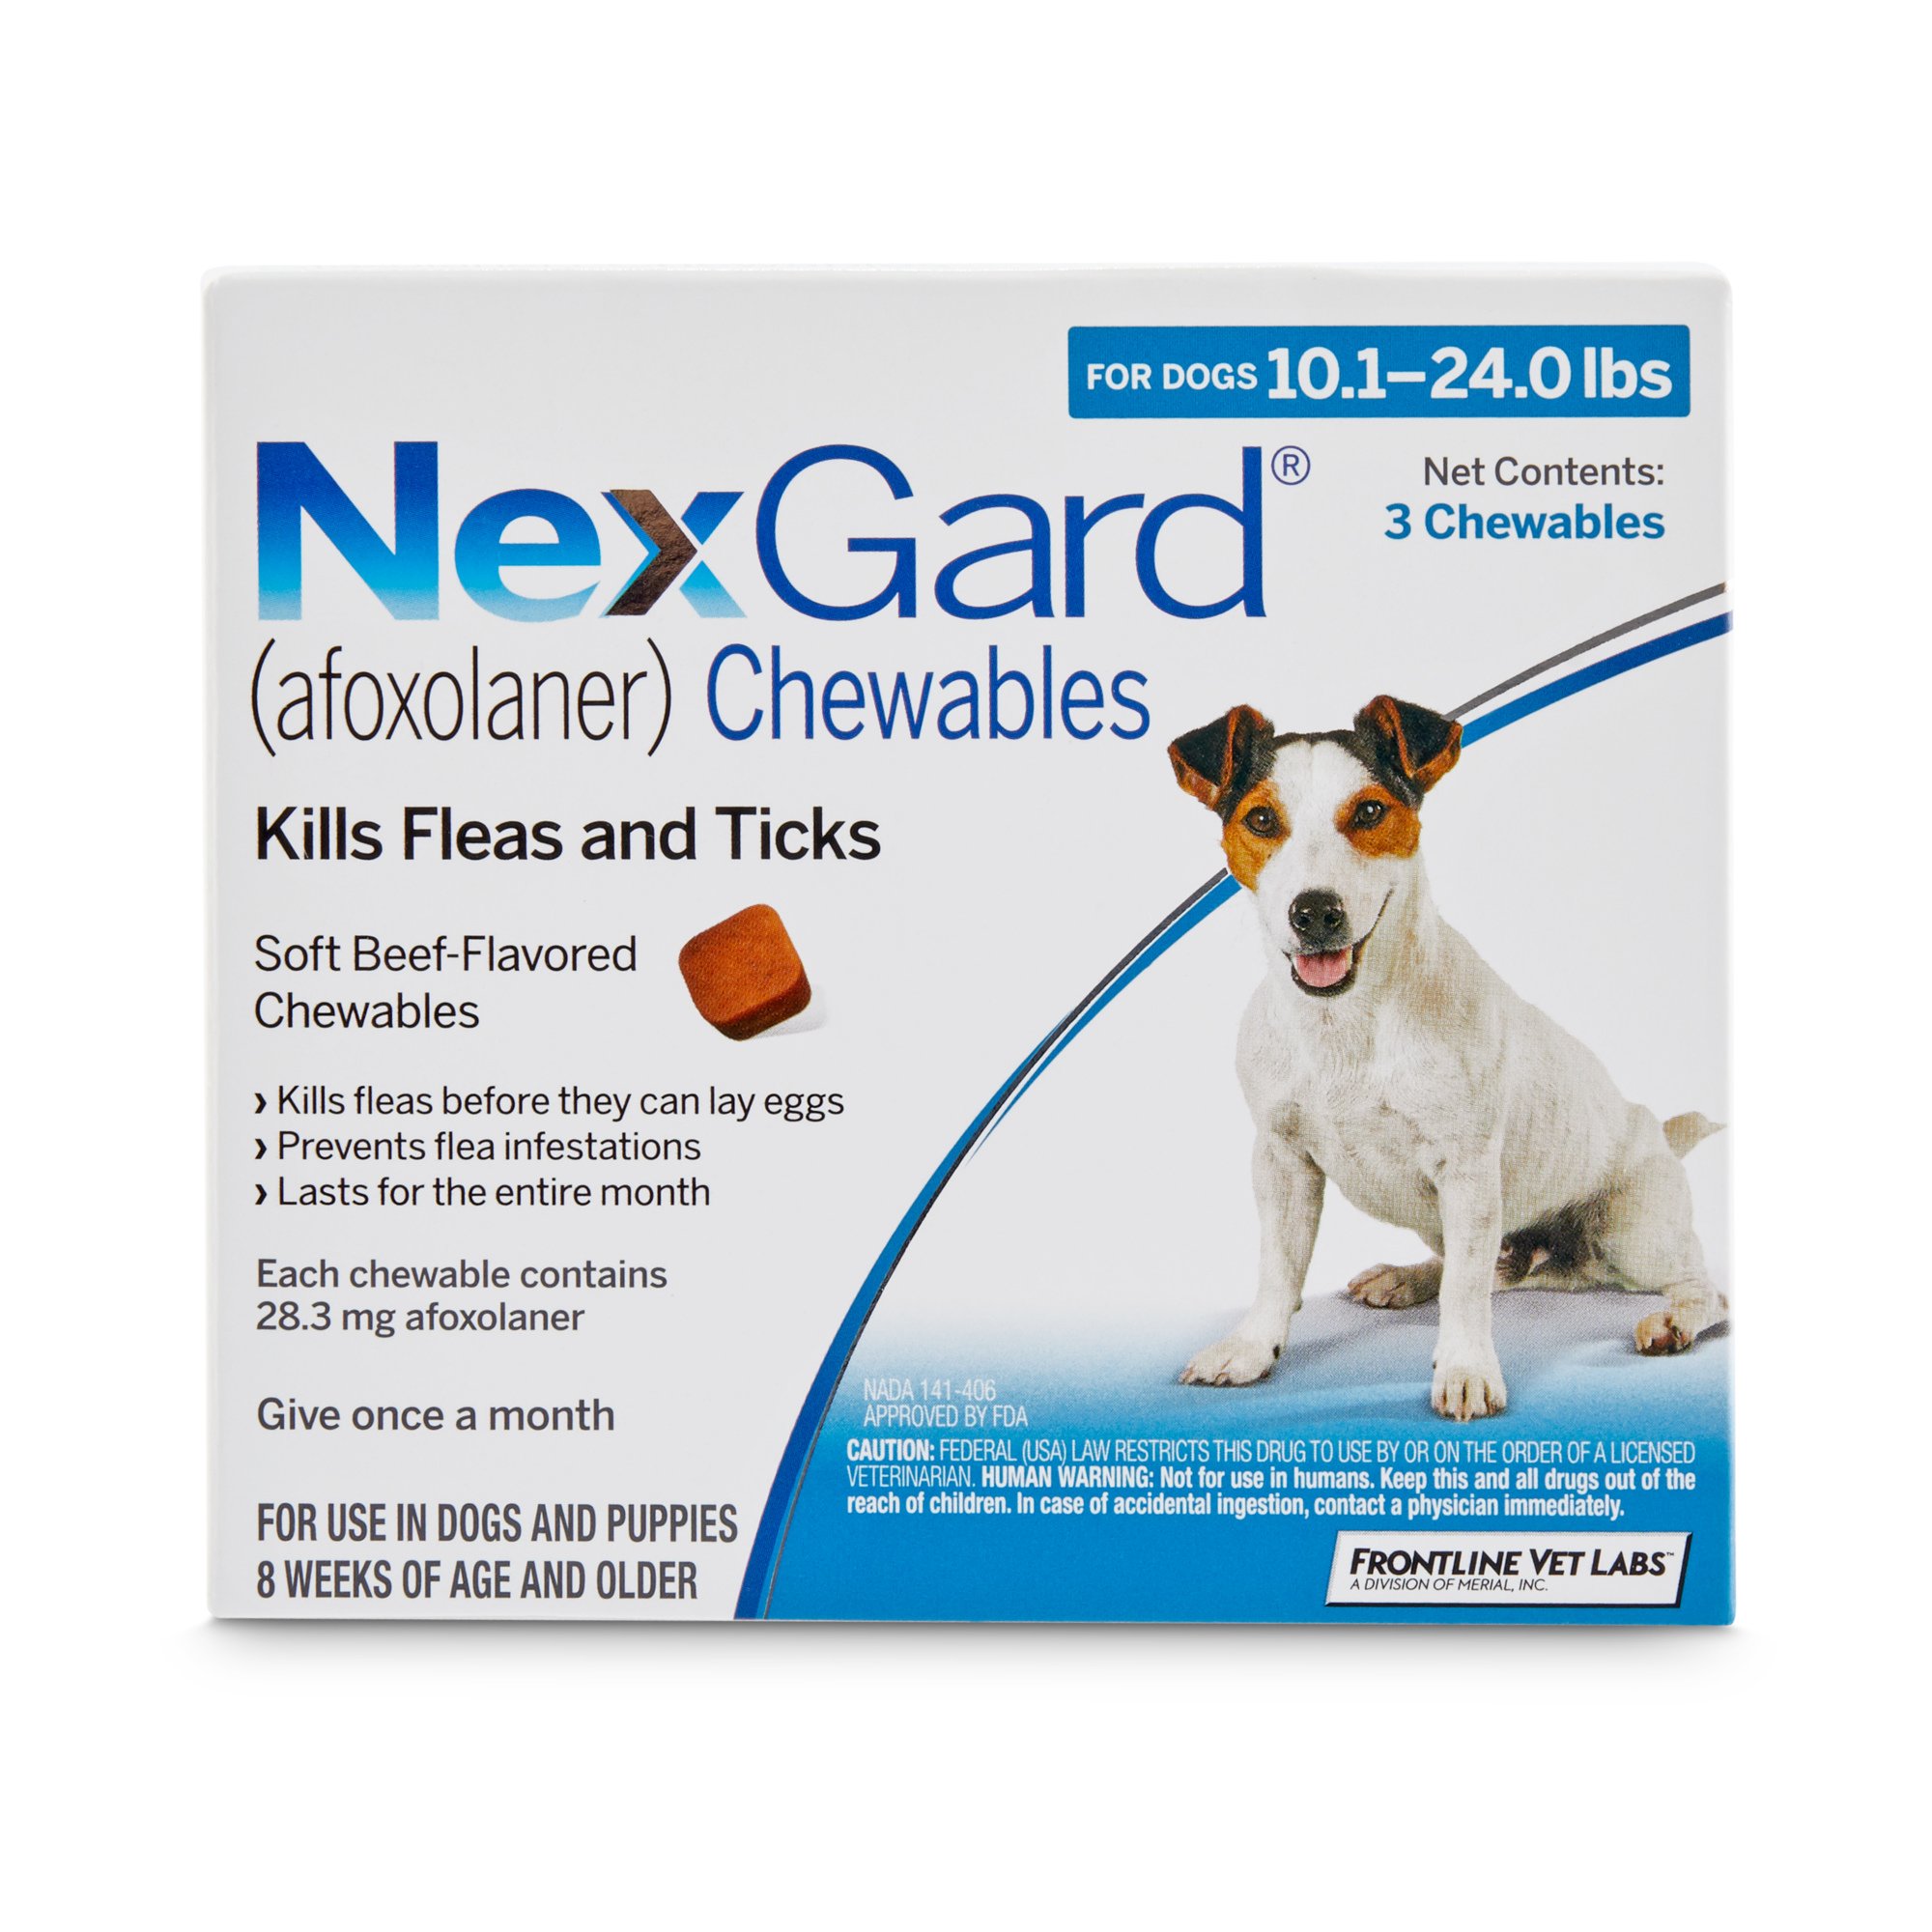 NexGard Chewables - Blue for Dogs 10.1 